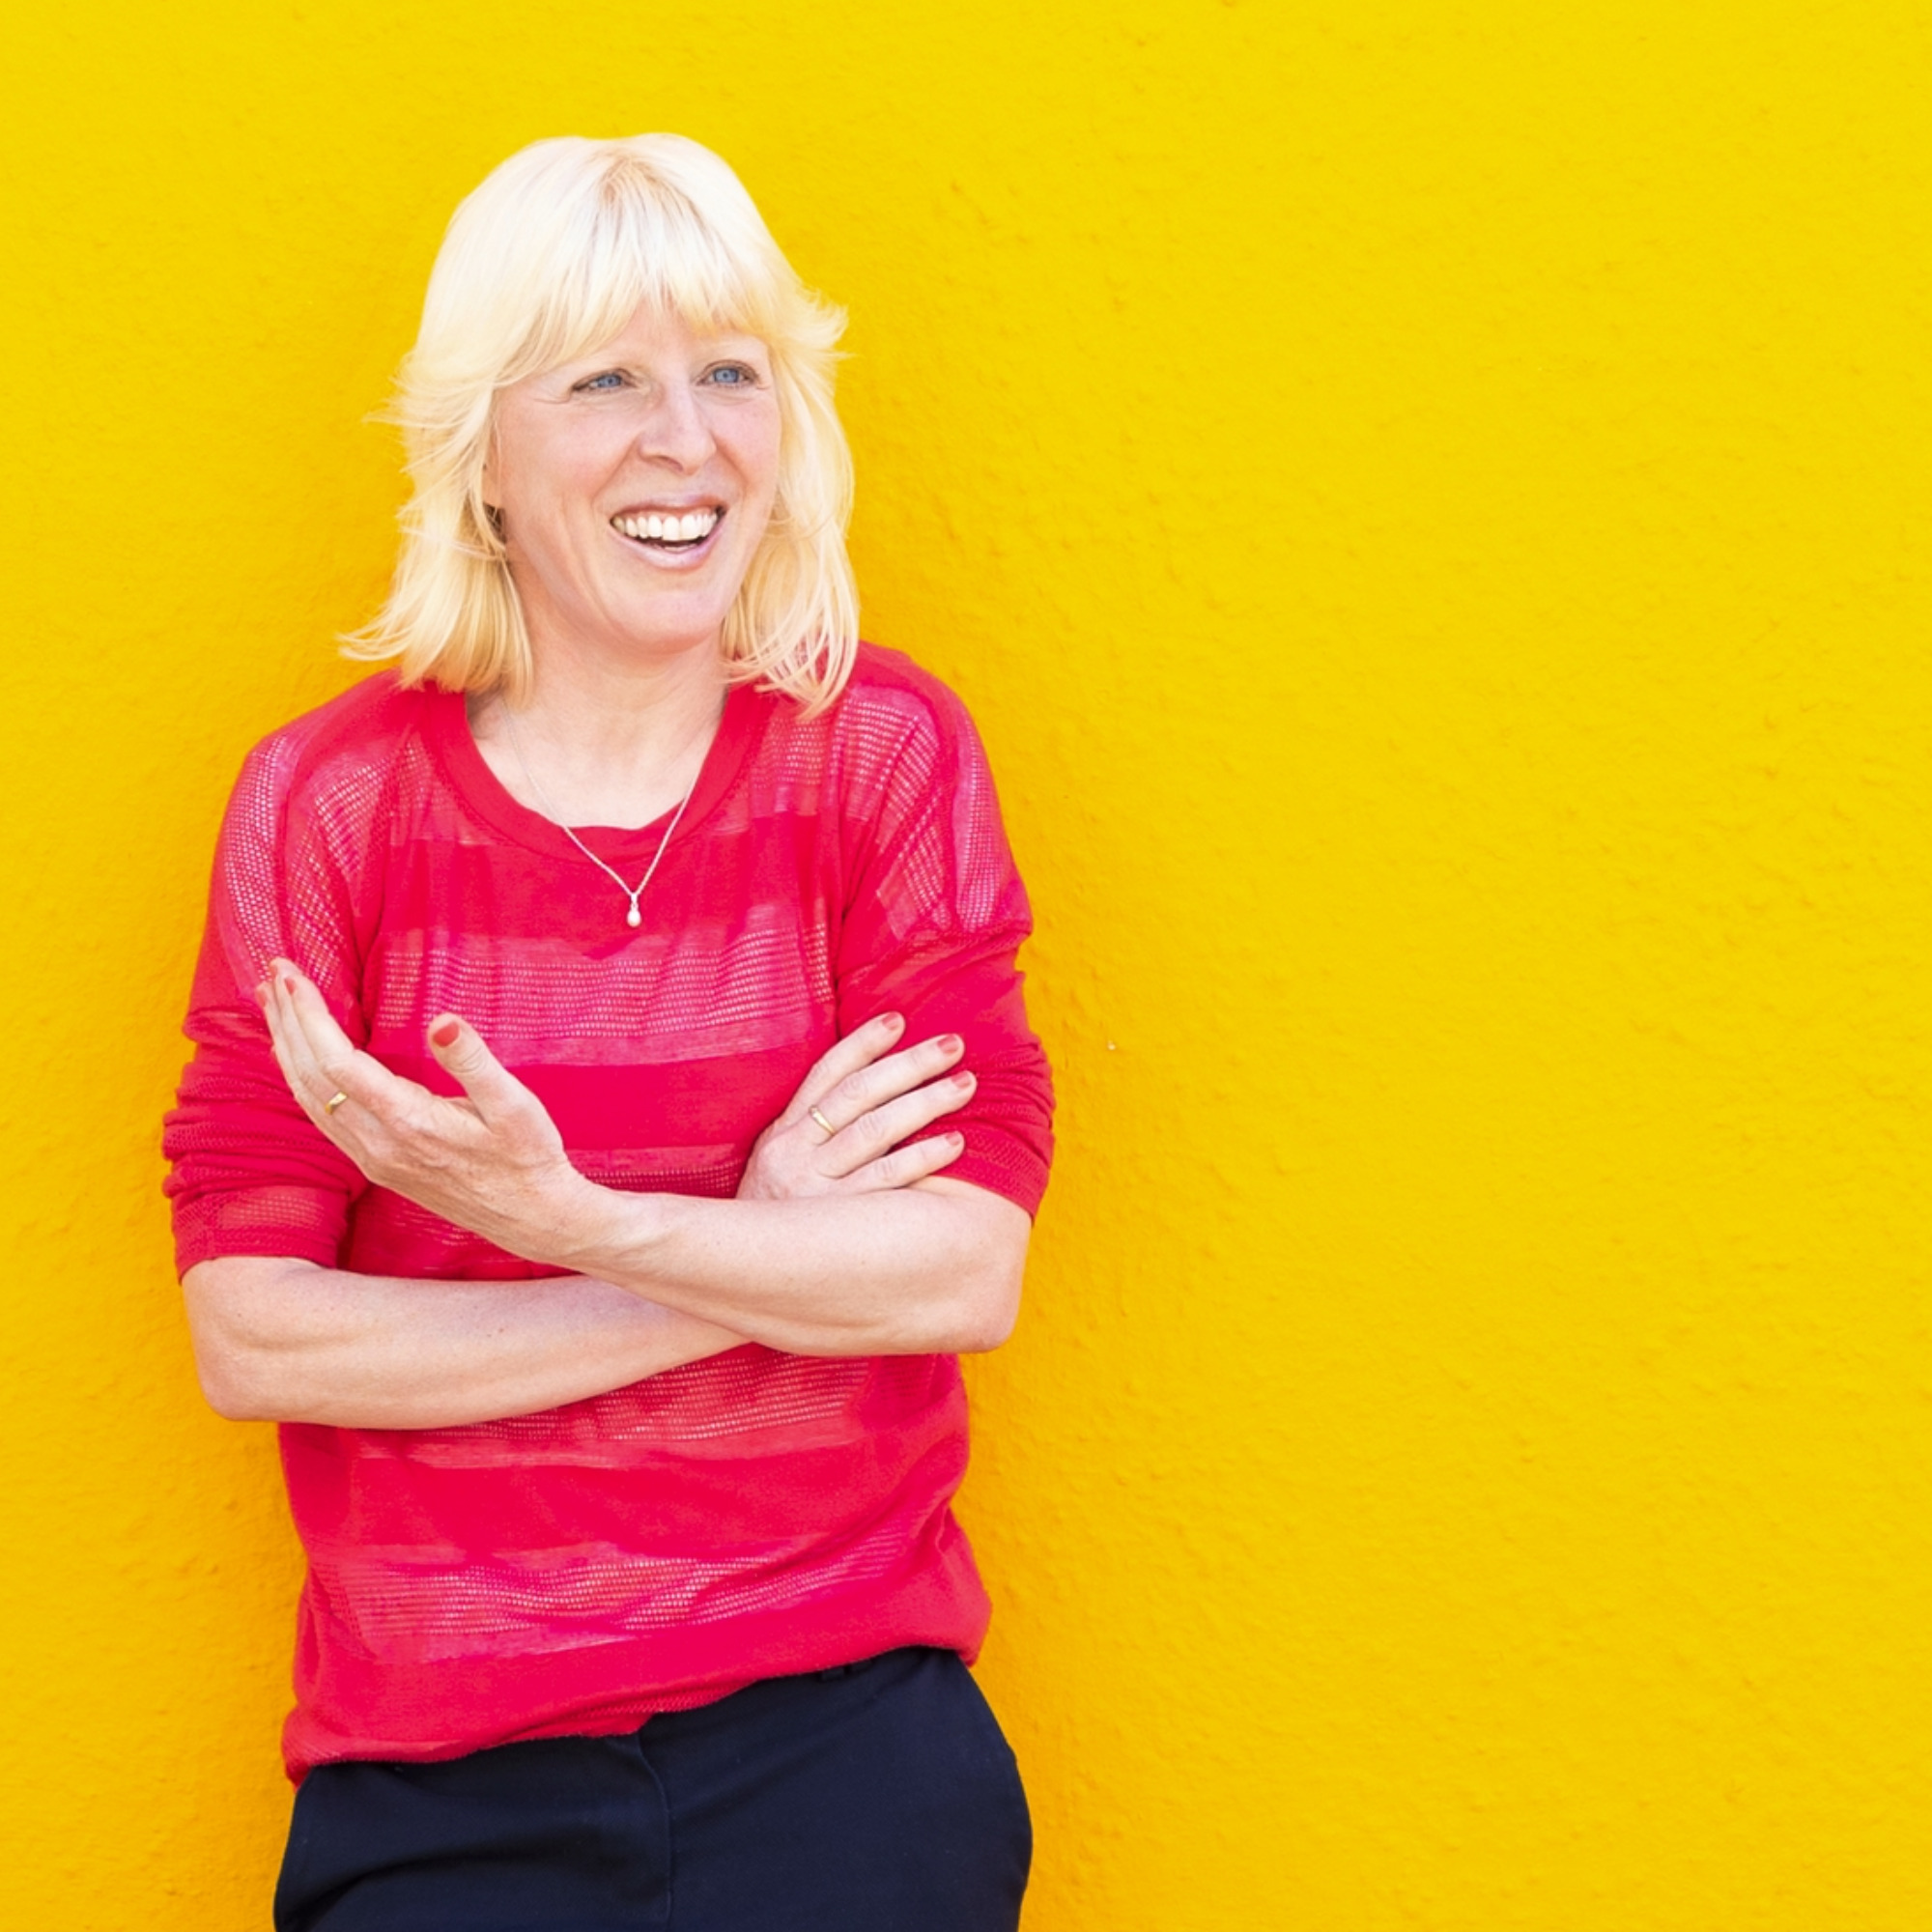 Leigh (a white female) leant against a mustard yellow wall. She's in a pink top with the sleeves rolled up, and navy trousers. She's smiling, and raising her left arm in a gesture.